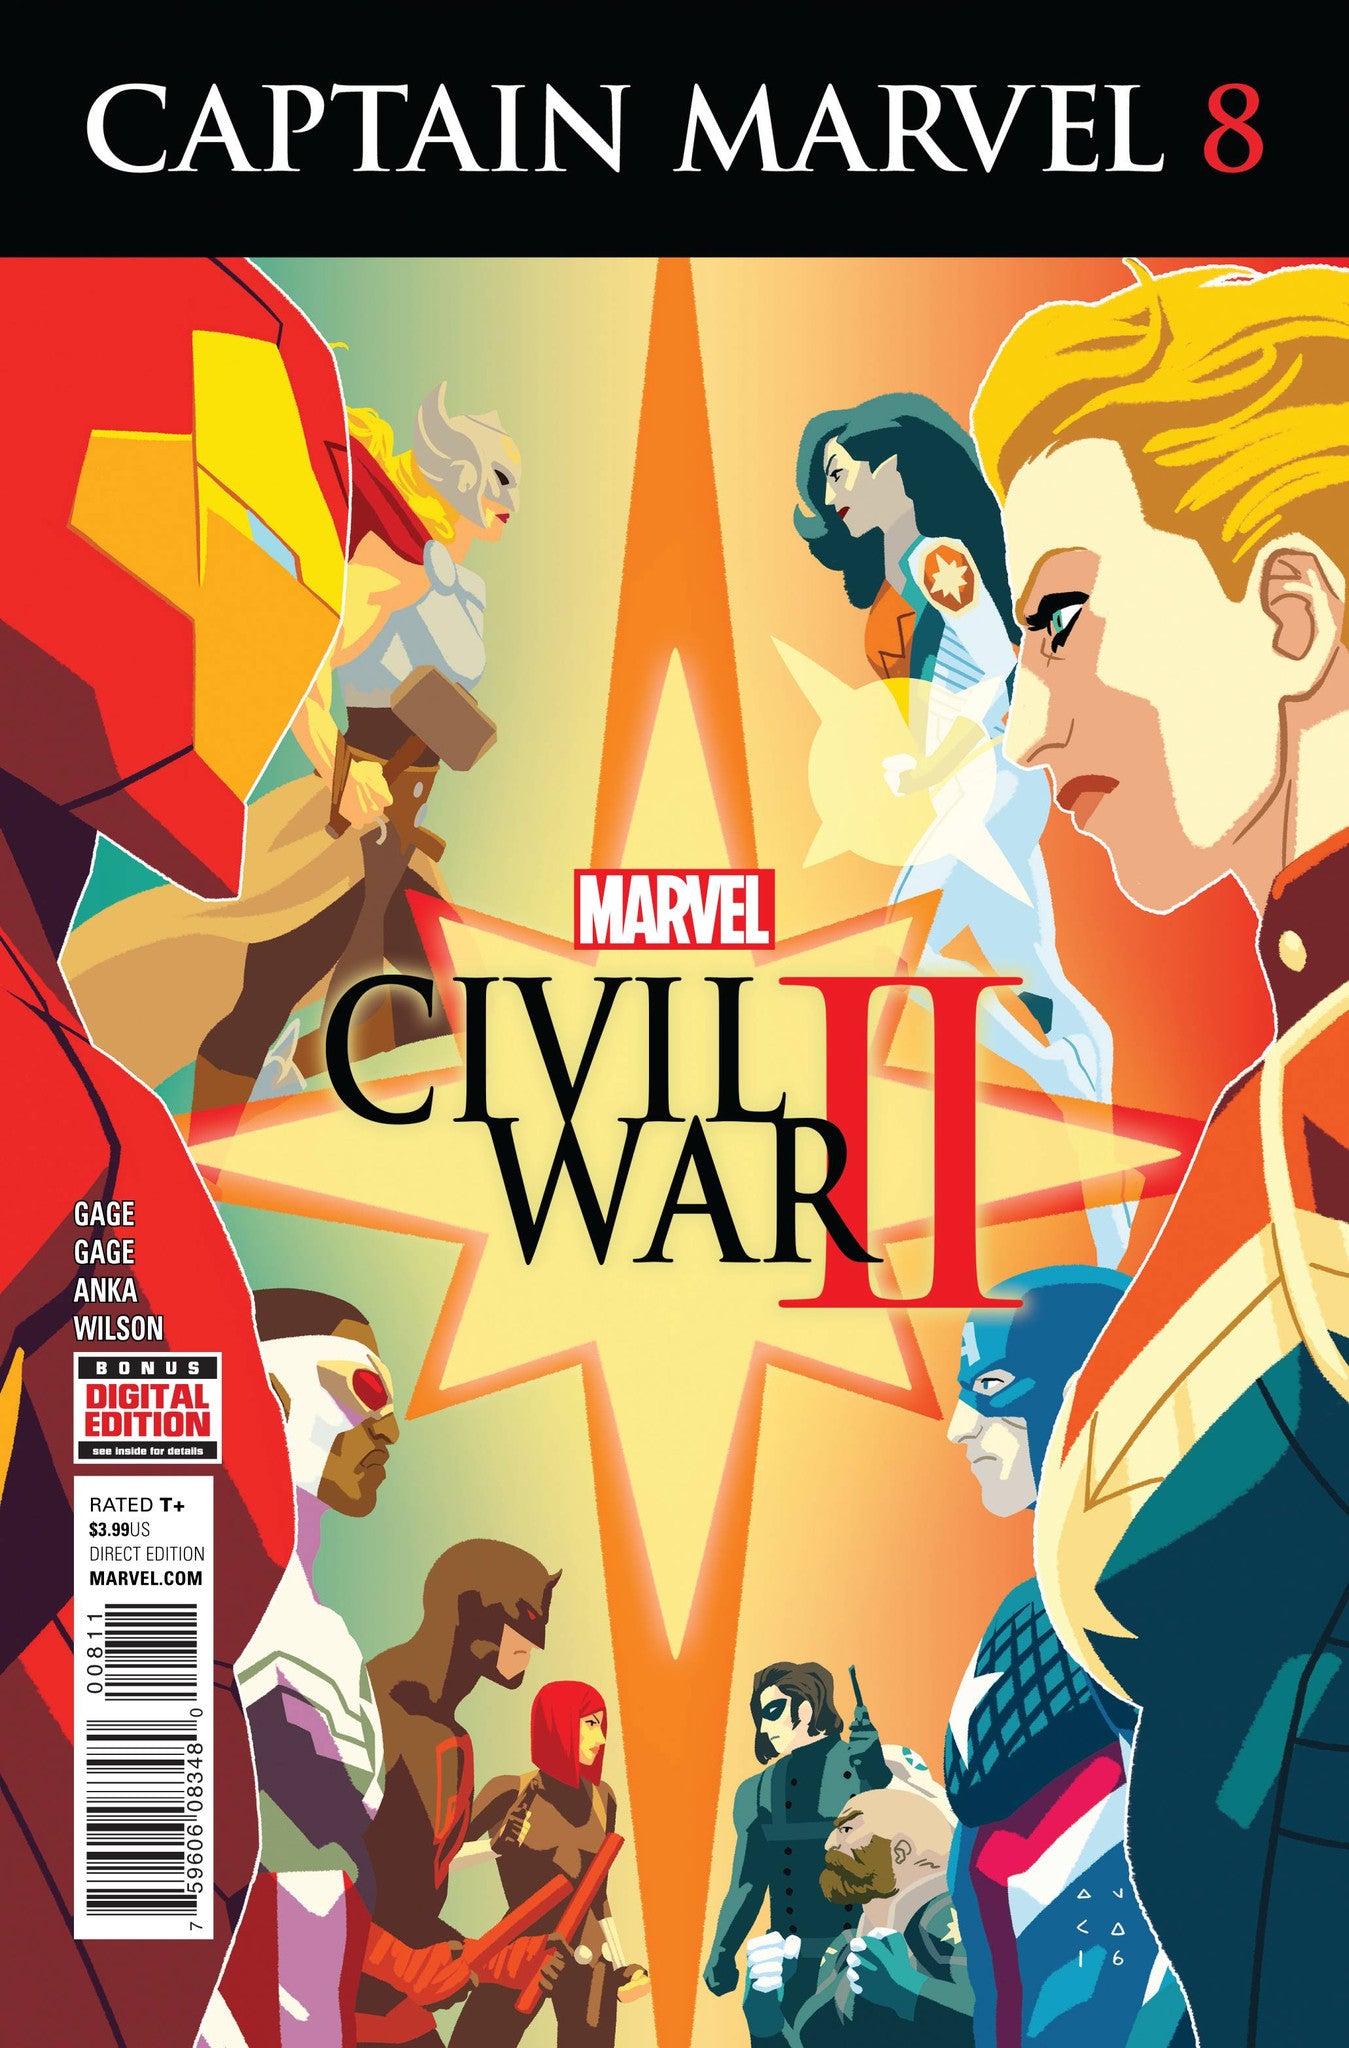 CAPTAIN MARVEL #8 CW2 COVER